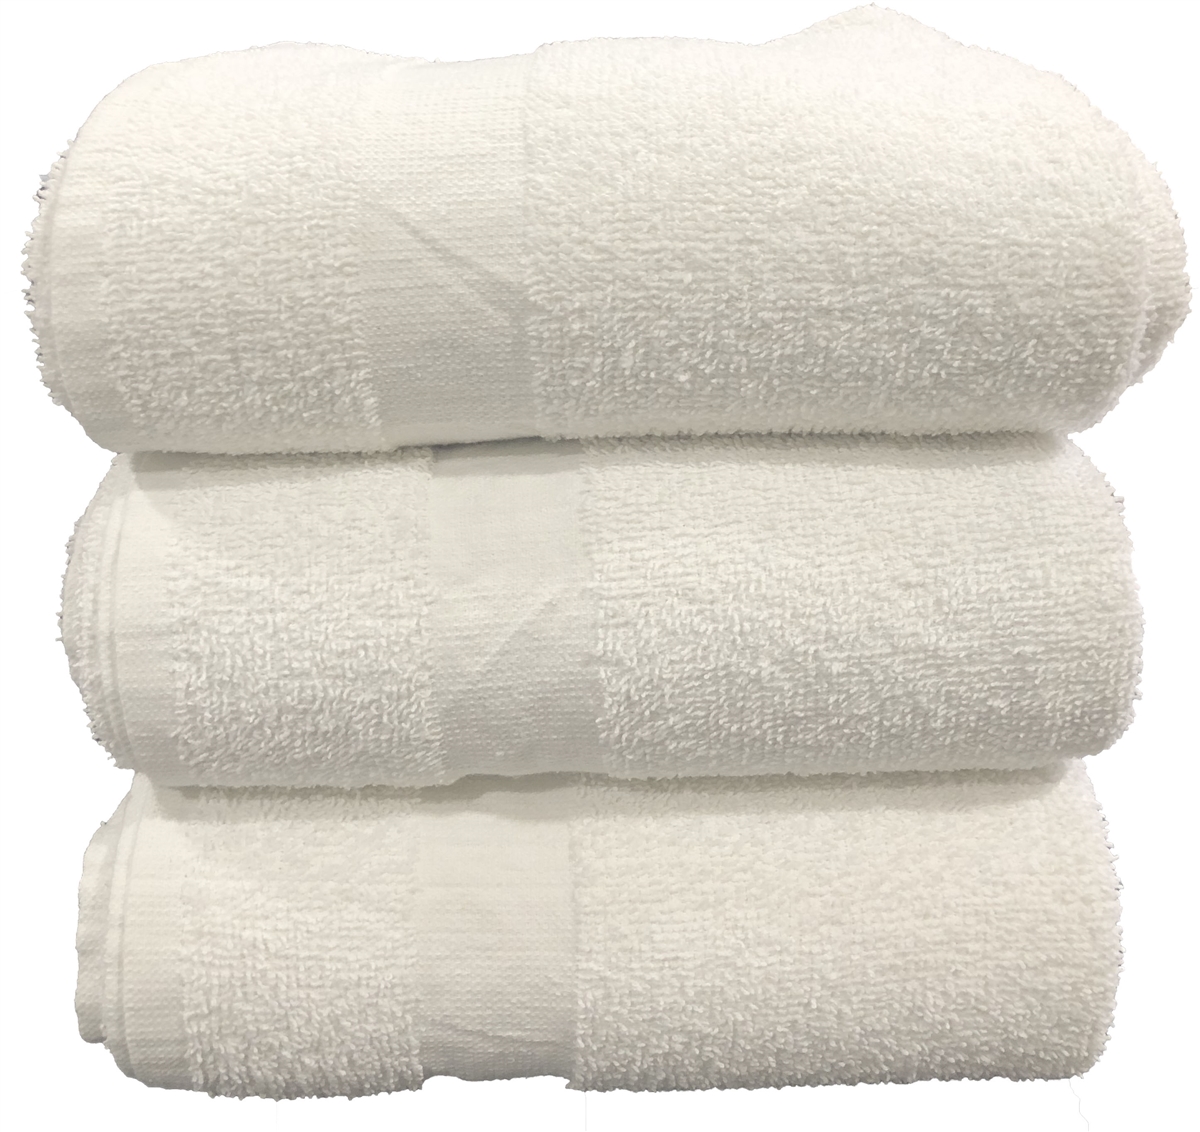 Wholesale Bath Towels White with Cam Border - In Bulk Cases